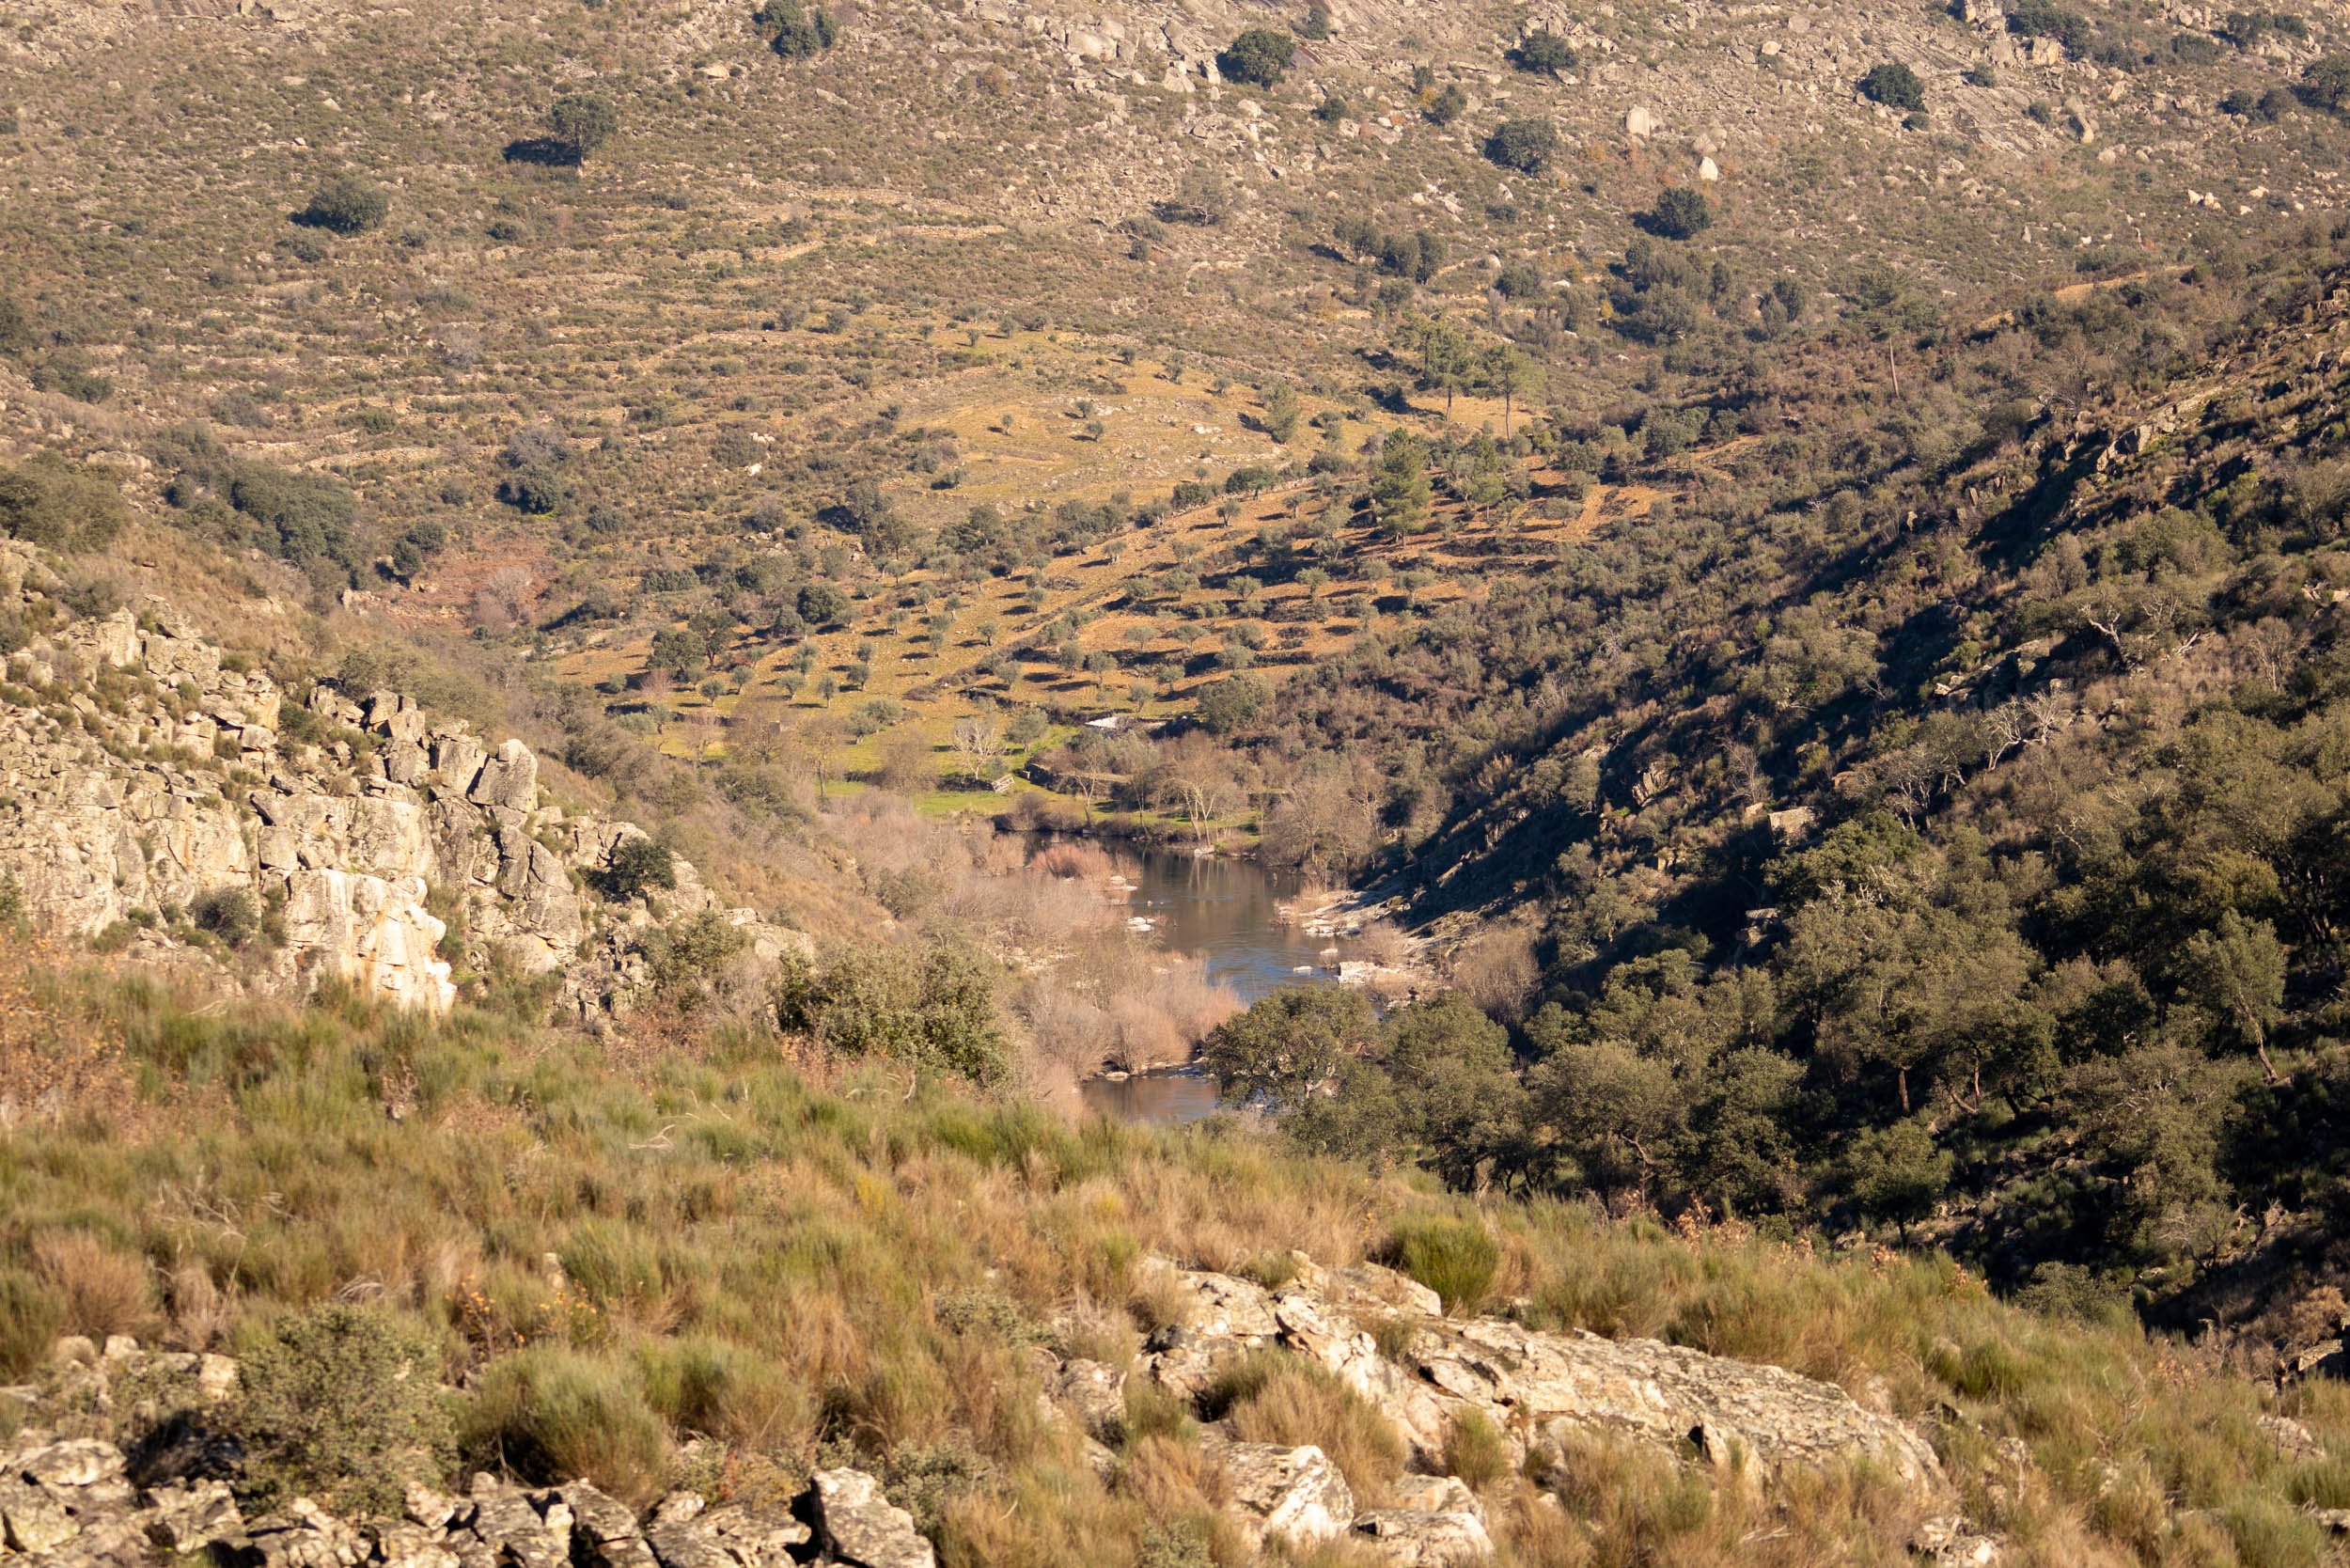 The image shows a landscape looking down from the top of a hill to a river.